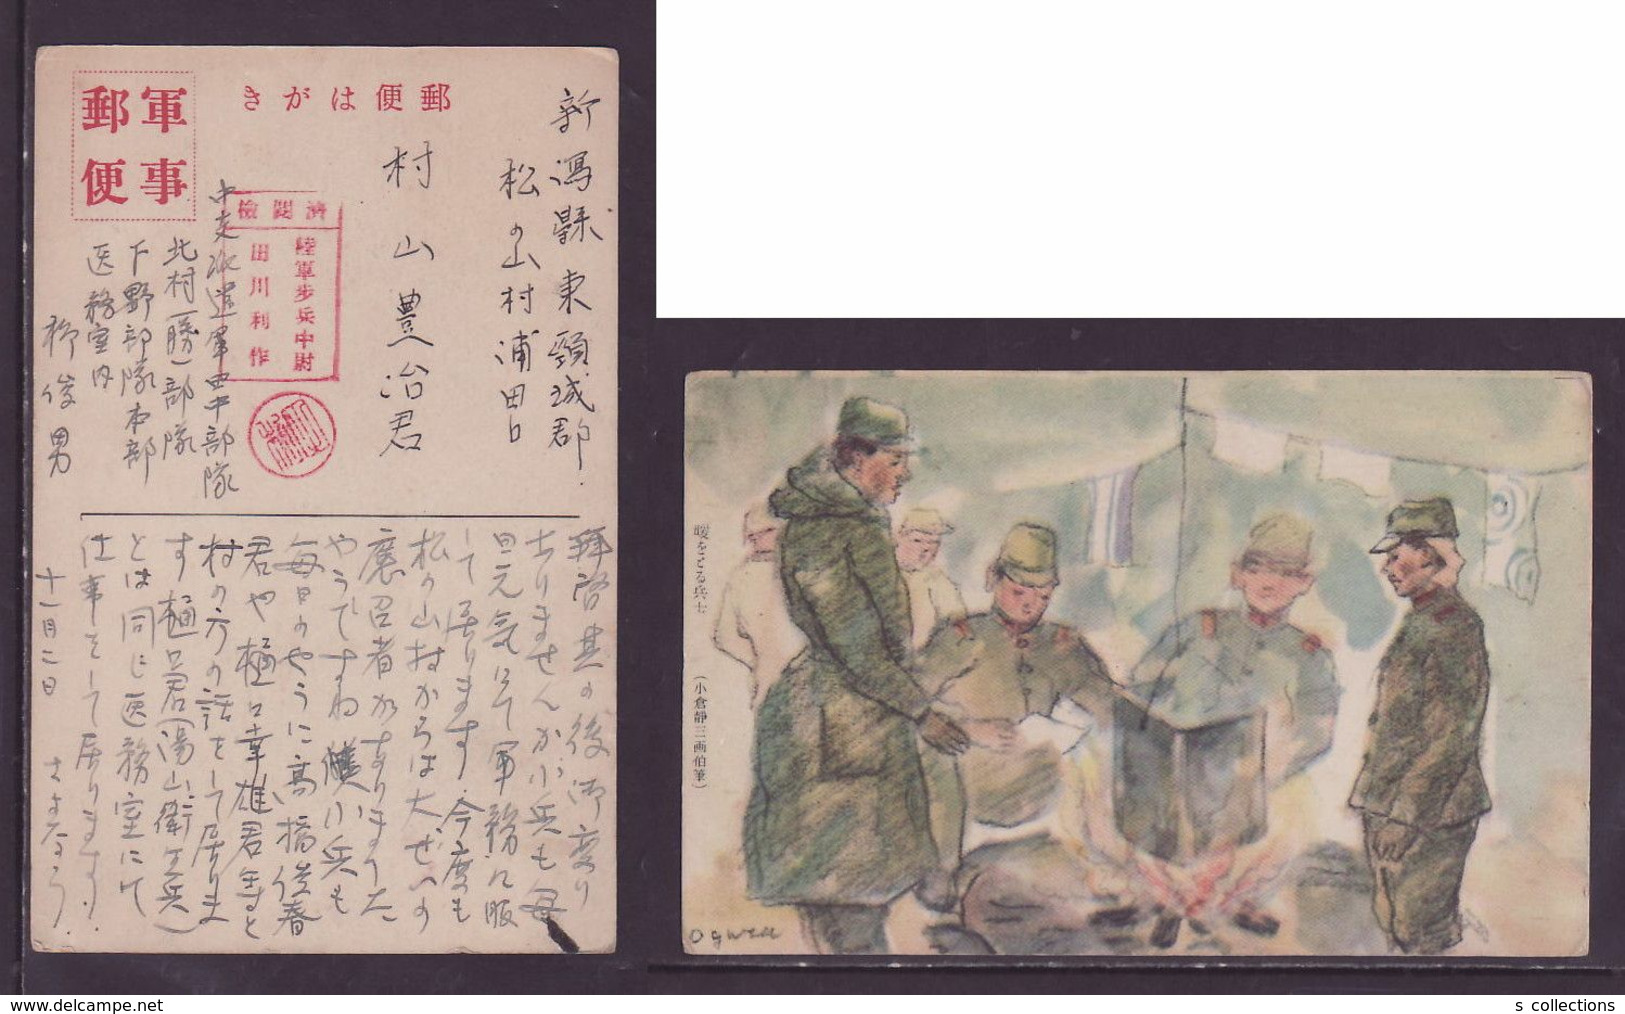 JAPAN WWII Military Japanese Soldier Picture Postcard Central ChinaWW2 MANCHURIA CHINE MANDCHOUKOUO JAPON GIAPPONE - 1941-45 Chine Du Nord